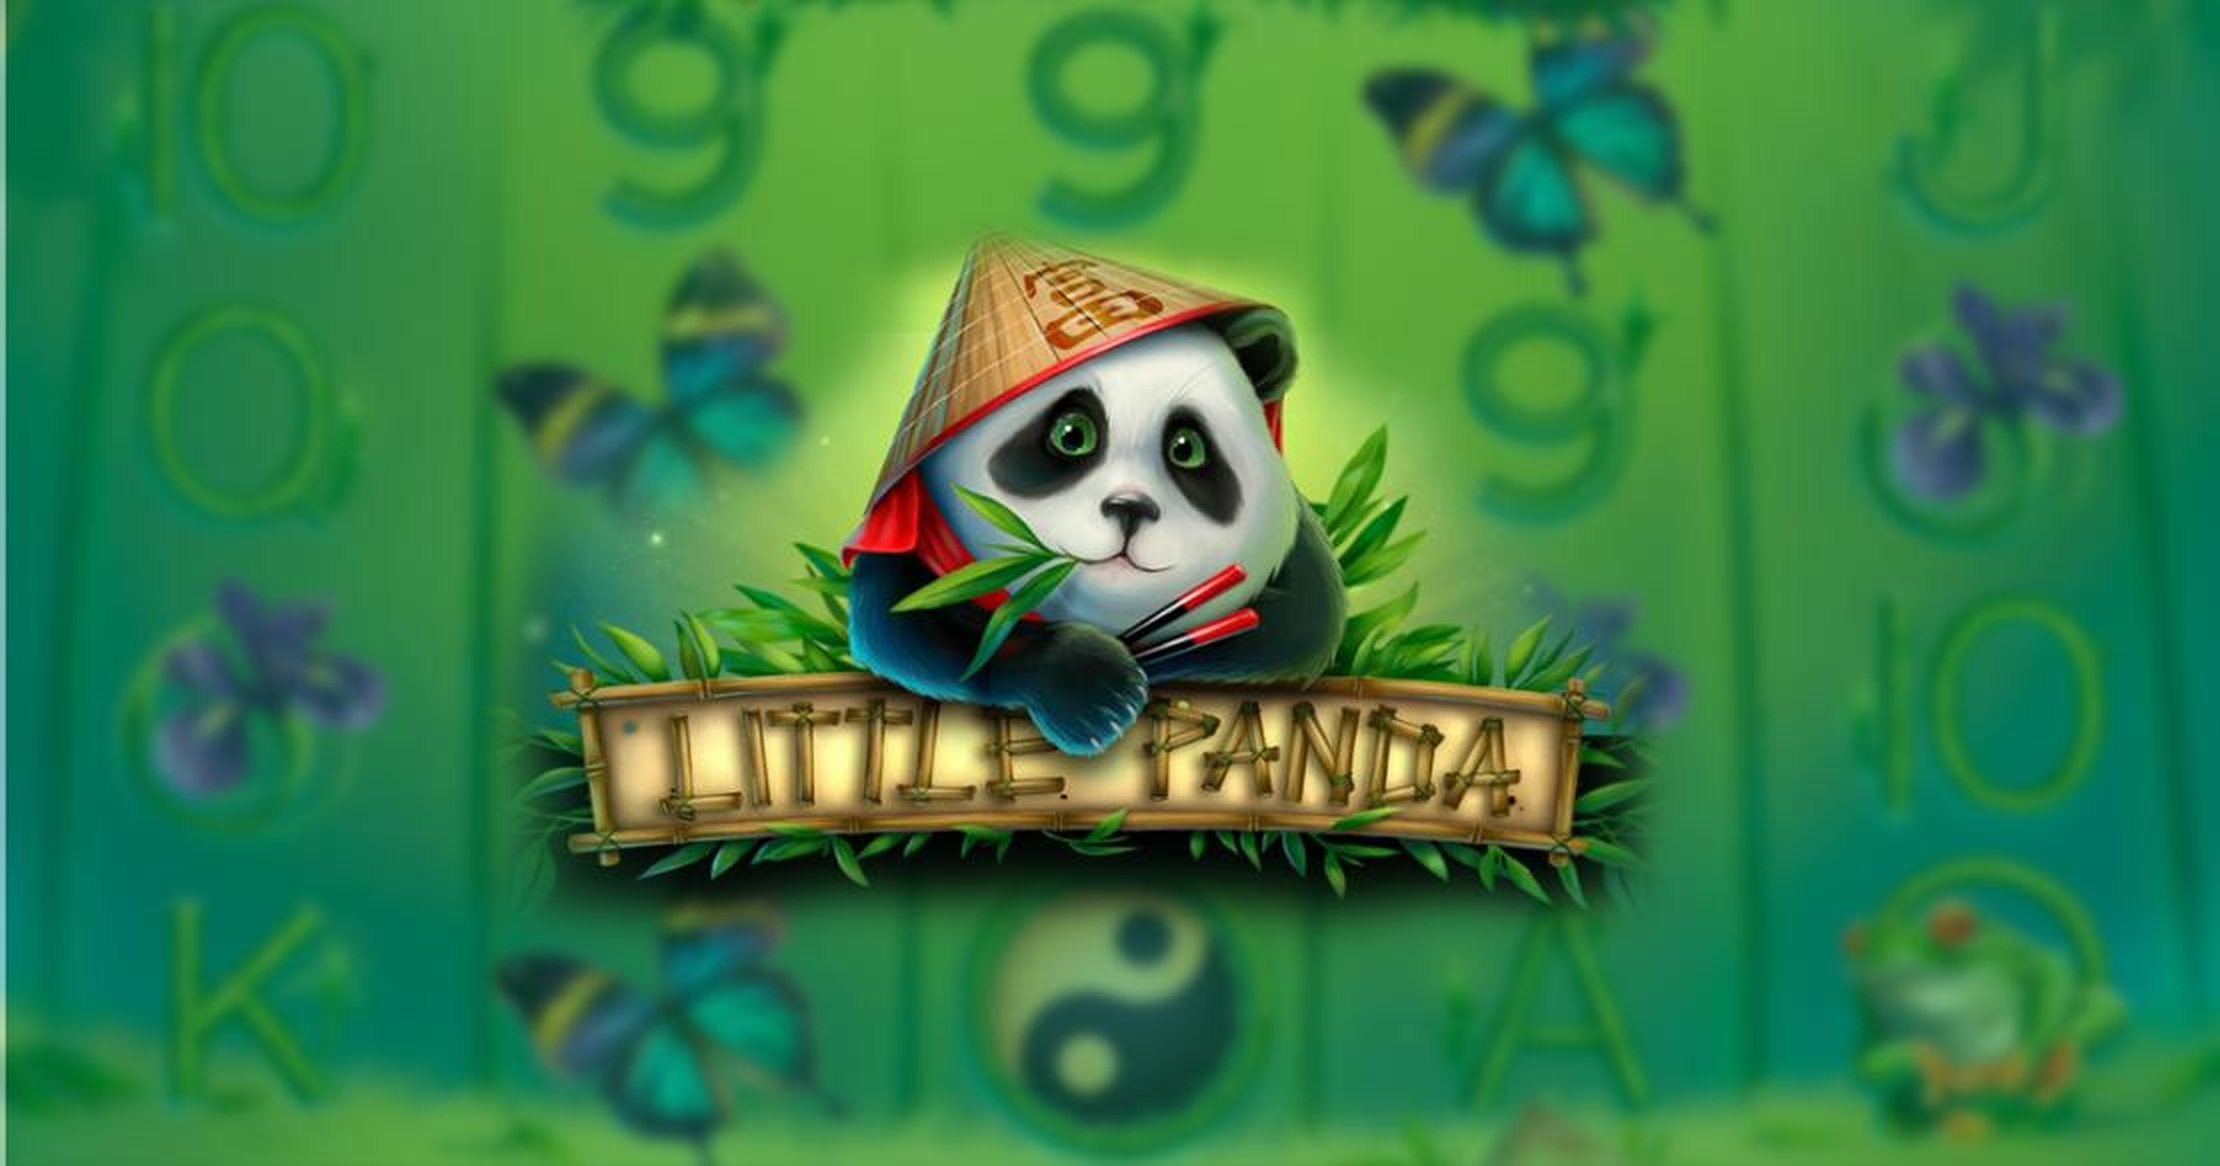 The Little Panda Online Slot Demo Game by Endorphina